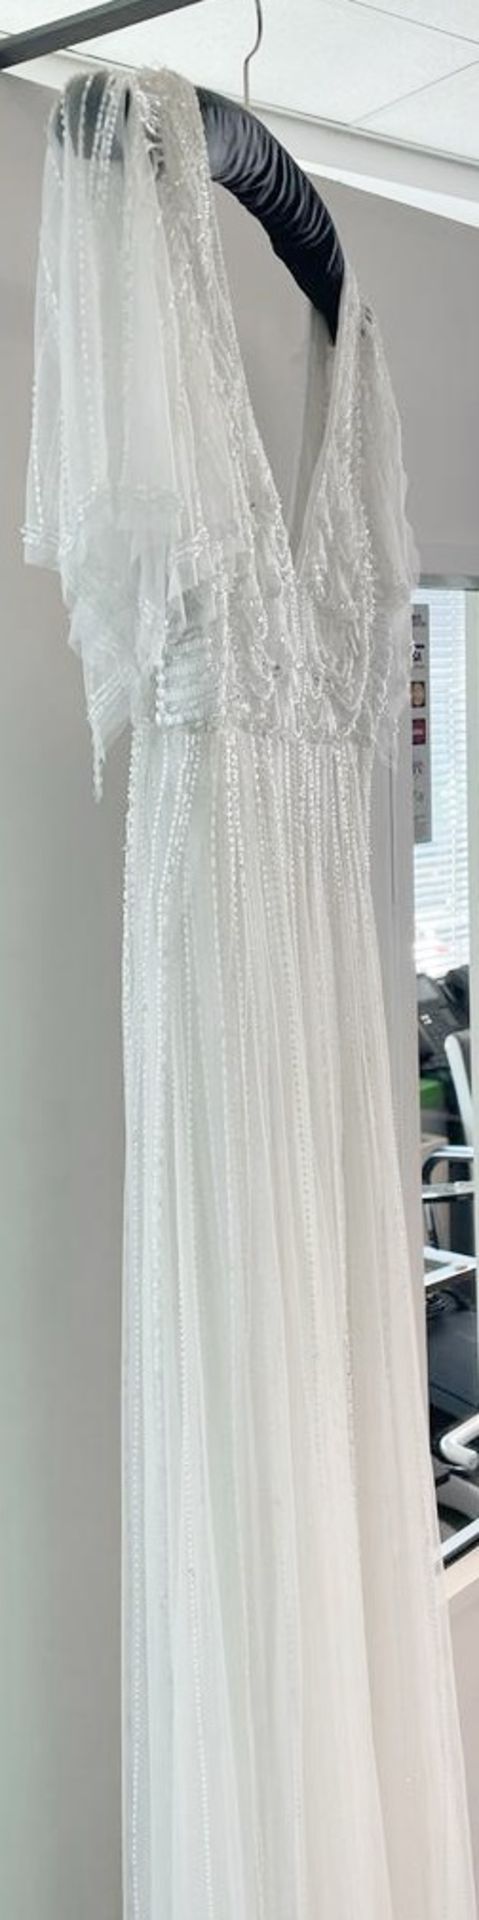 1 x ELIZA JANE HOWELL 'Gertrude' Designer Beaded Fit Empire Line Wedding Dress Bridal Gown, With - Image 7 of 10